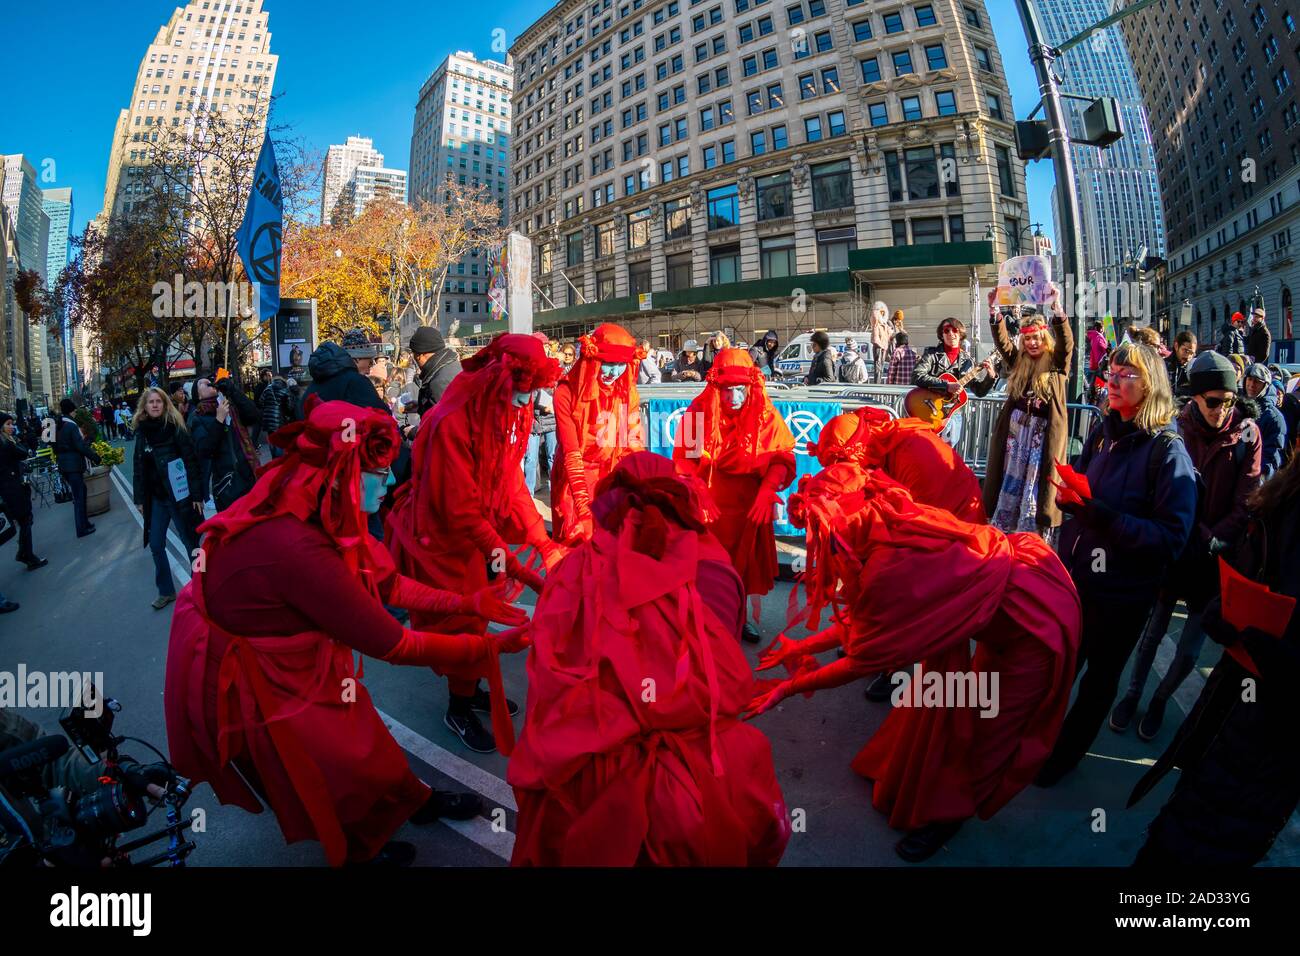 Environmental activists affiliated with Extinction Rebellion protest in Herald Square in New York on Friday, November 29, 2019. (© Richard B. Levine) Stock Photo